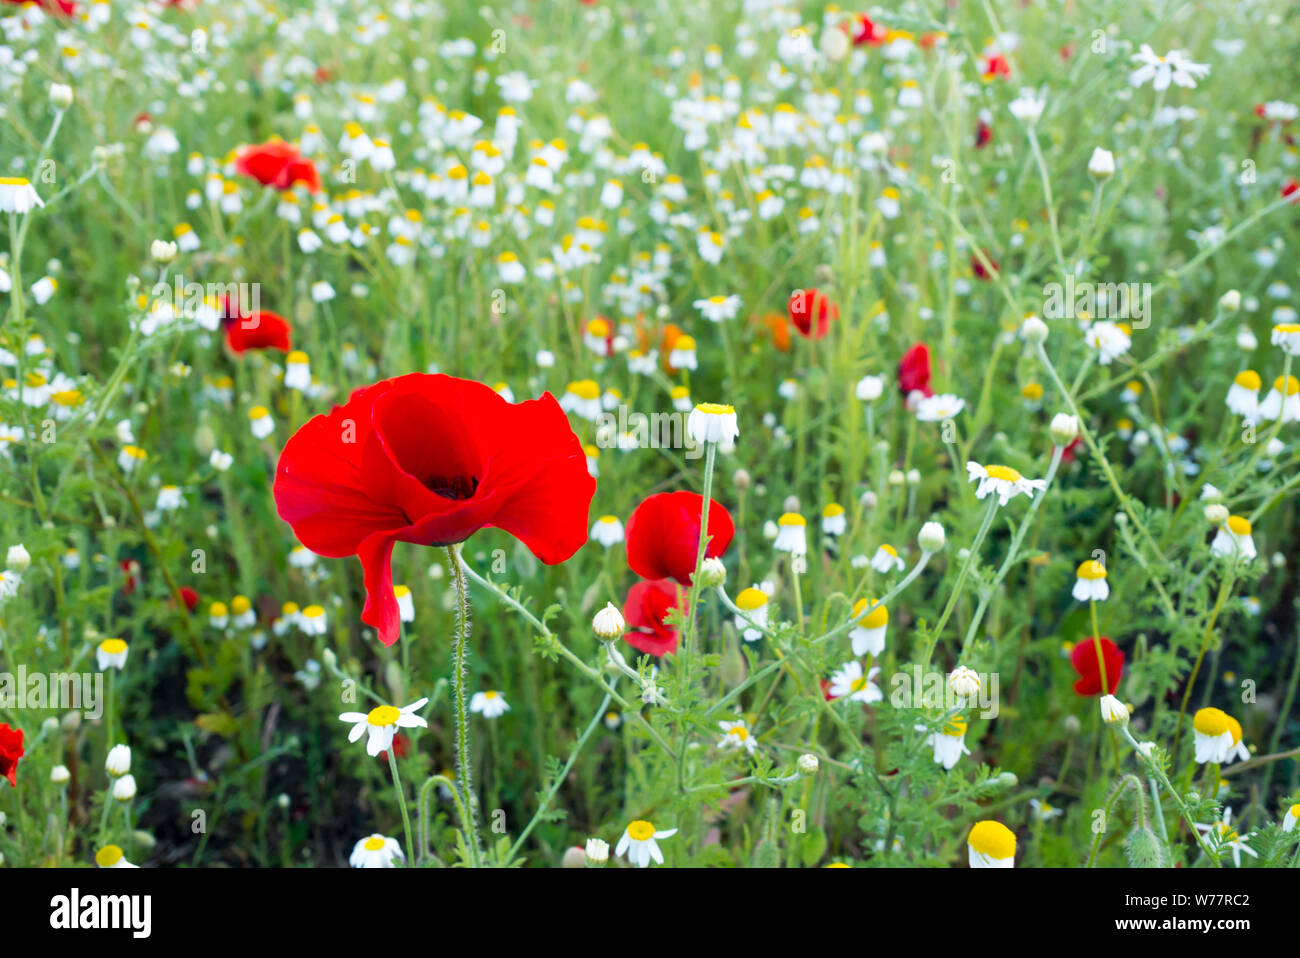 A Red Poppy Flower Growing Among a Field of Daisies Stock Photo